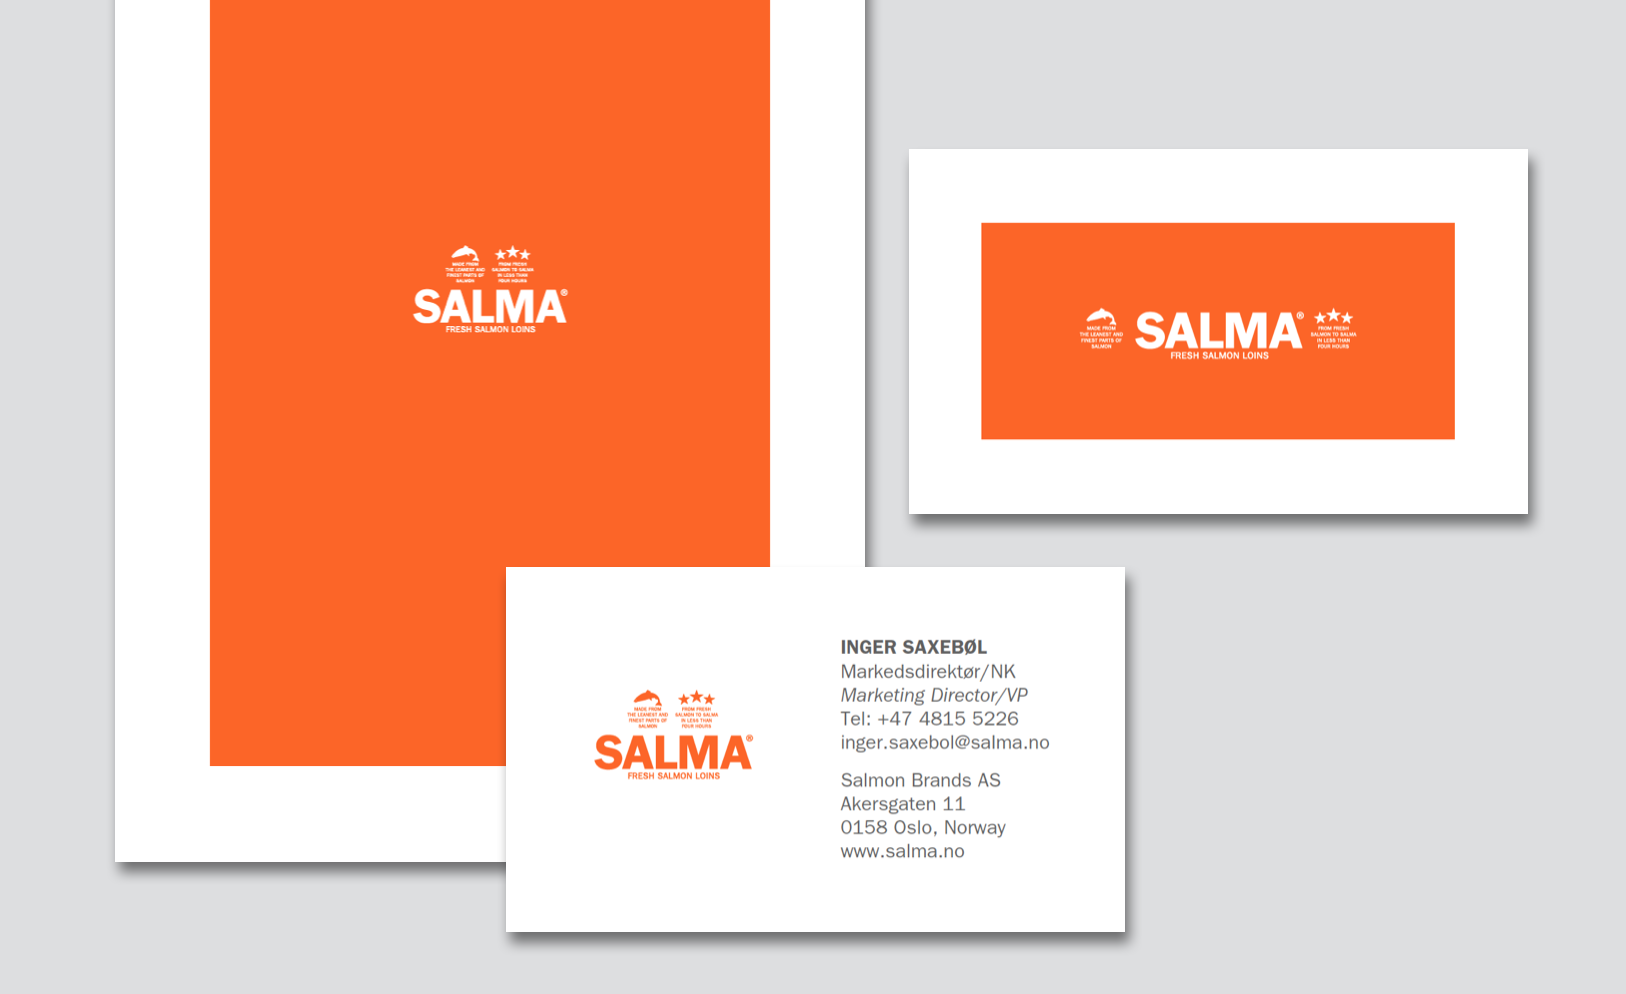  Corporate visual identity for Salma. Work done with Tangram (when part of Bates). 